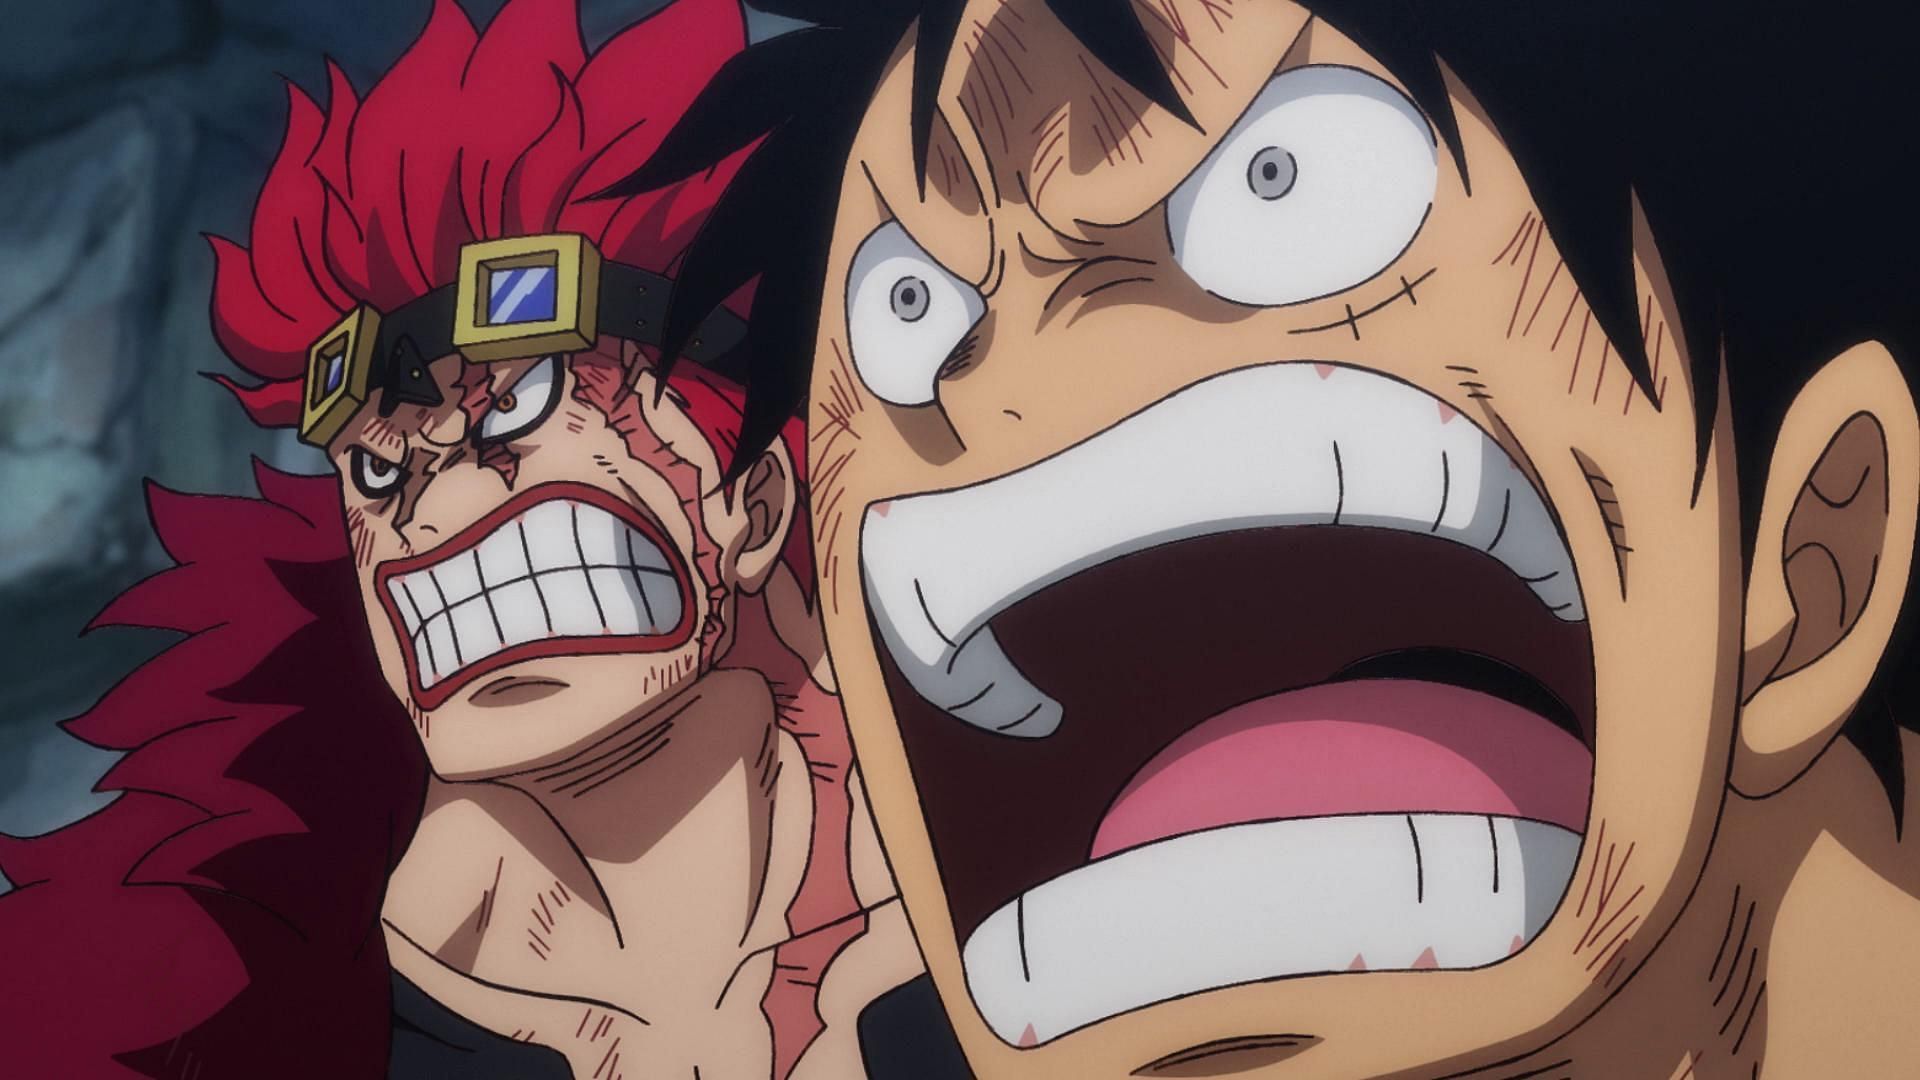 Kid (left) and Luffy (right) as seen in the series